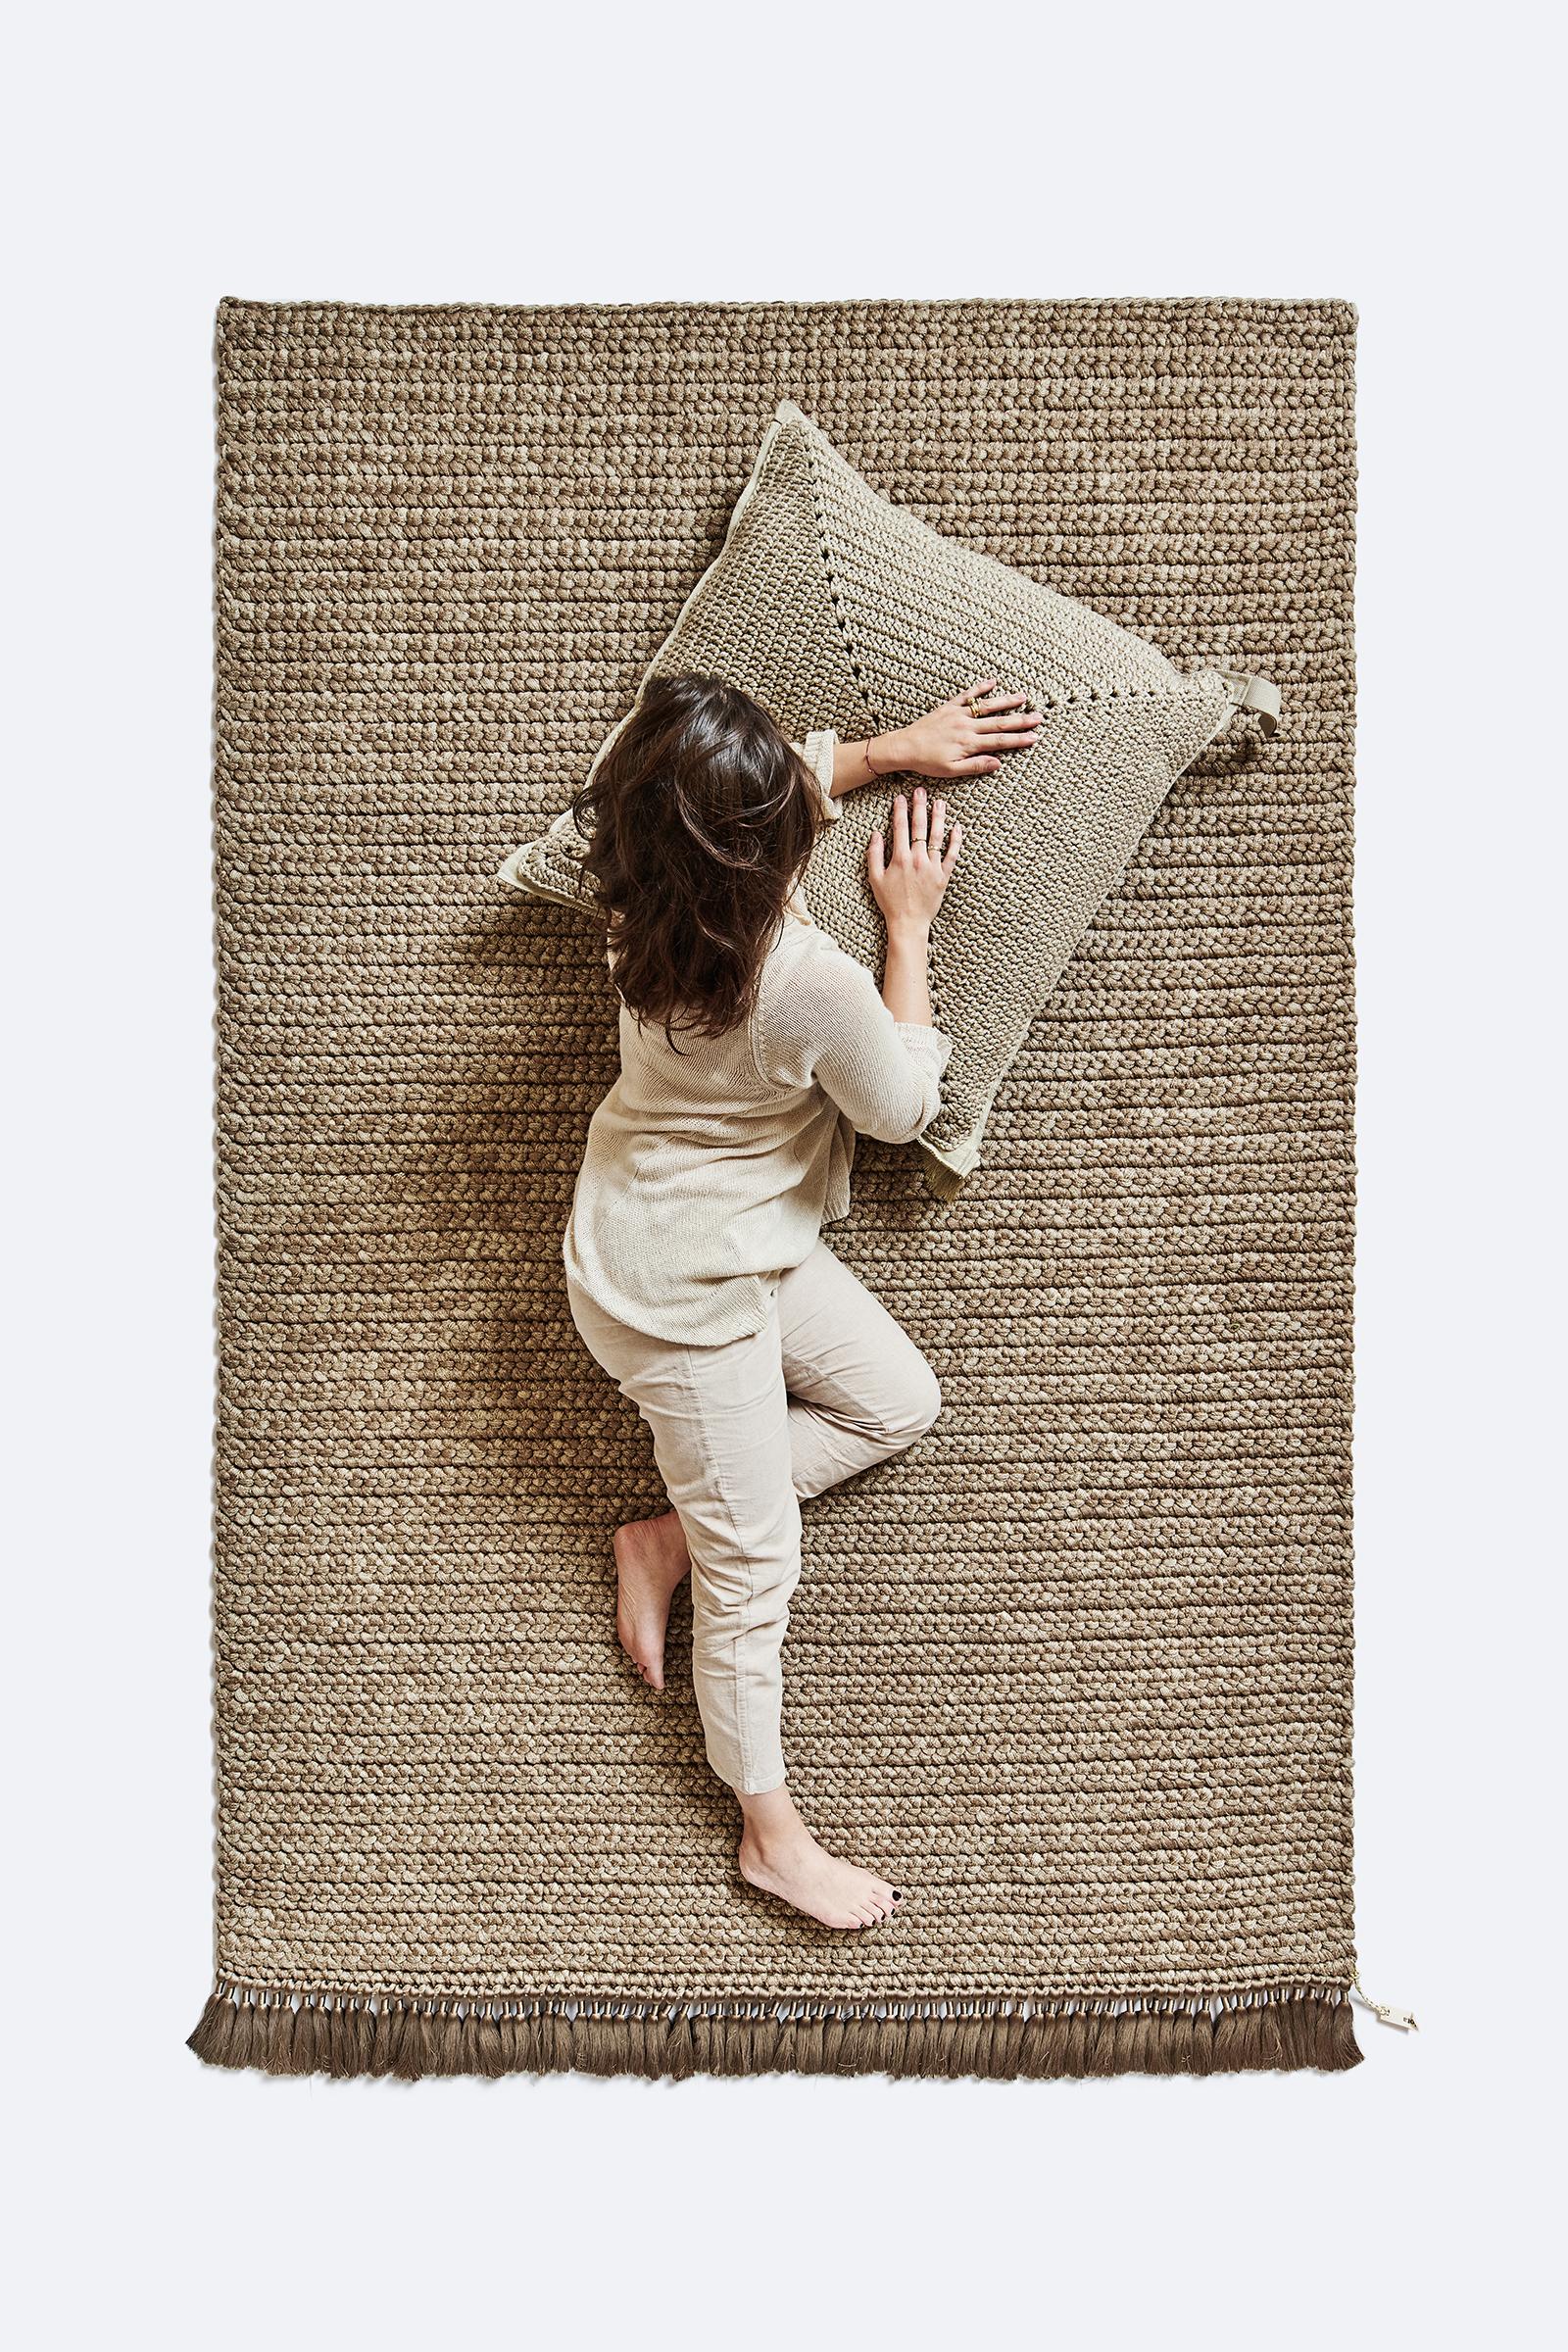 IOTA rugs are thick, soft, hand knit and luxurious, 3 times thicker than the standard rug. The Two Tone medium rugs create a subtle gradient that will light up any space, suitable for an intimate corner in the living space as well as for bedrooms,